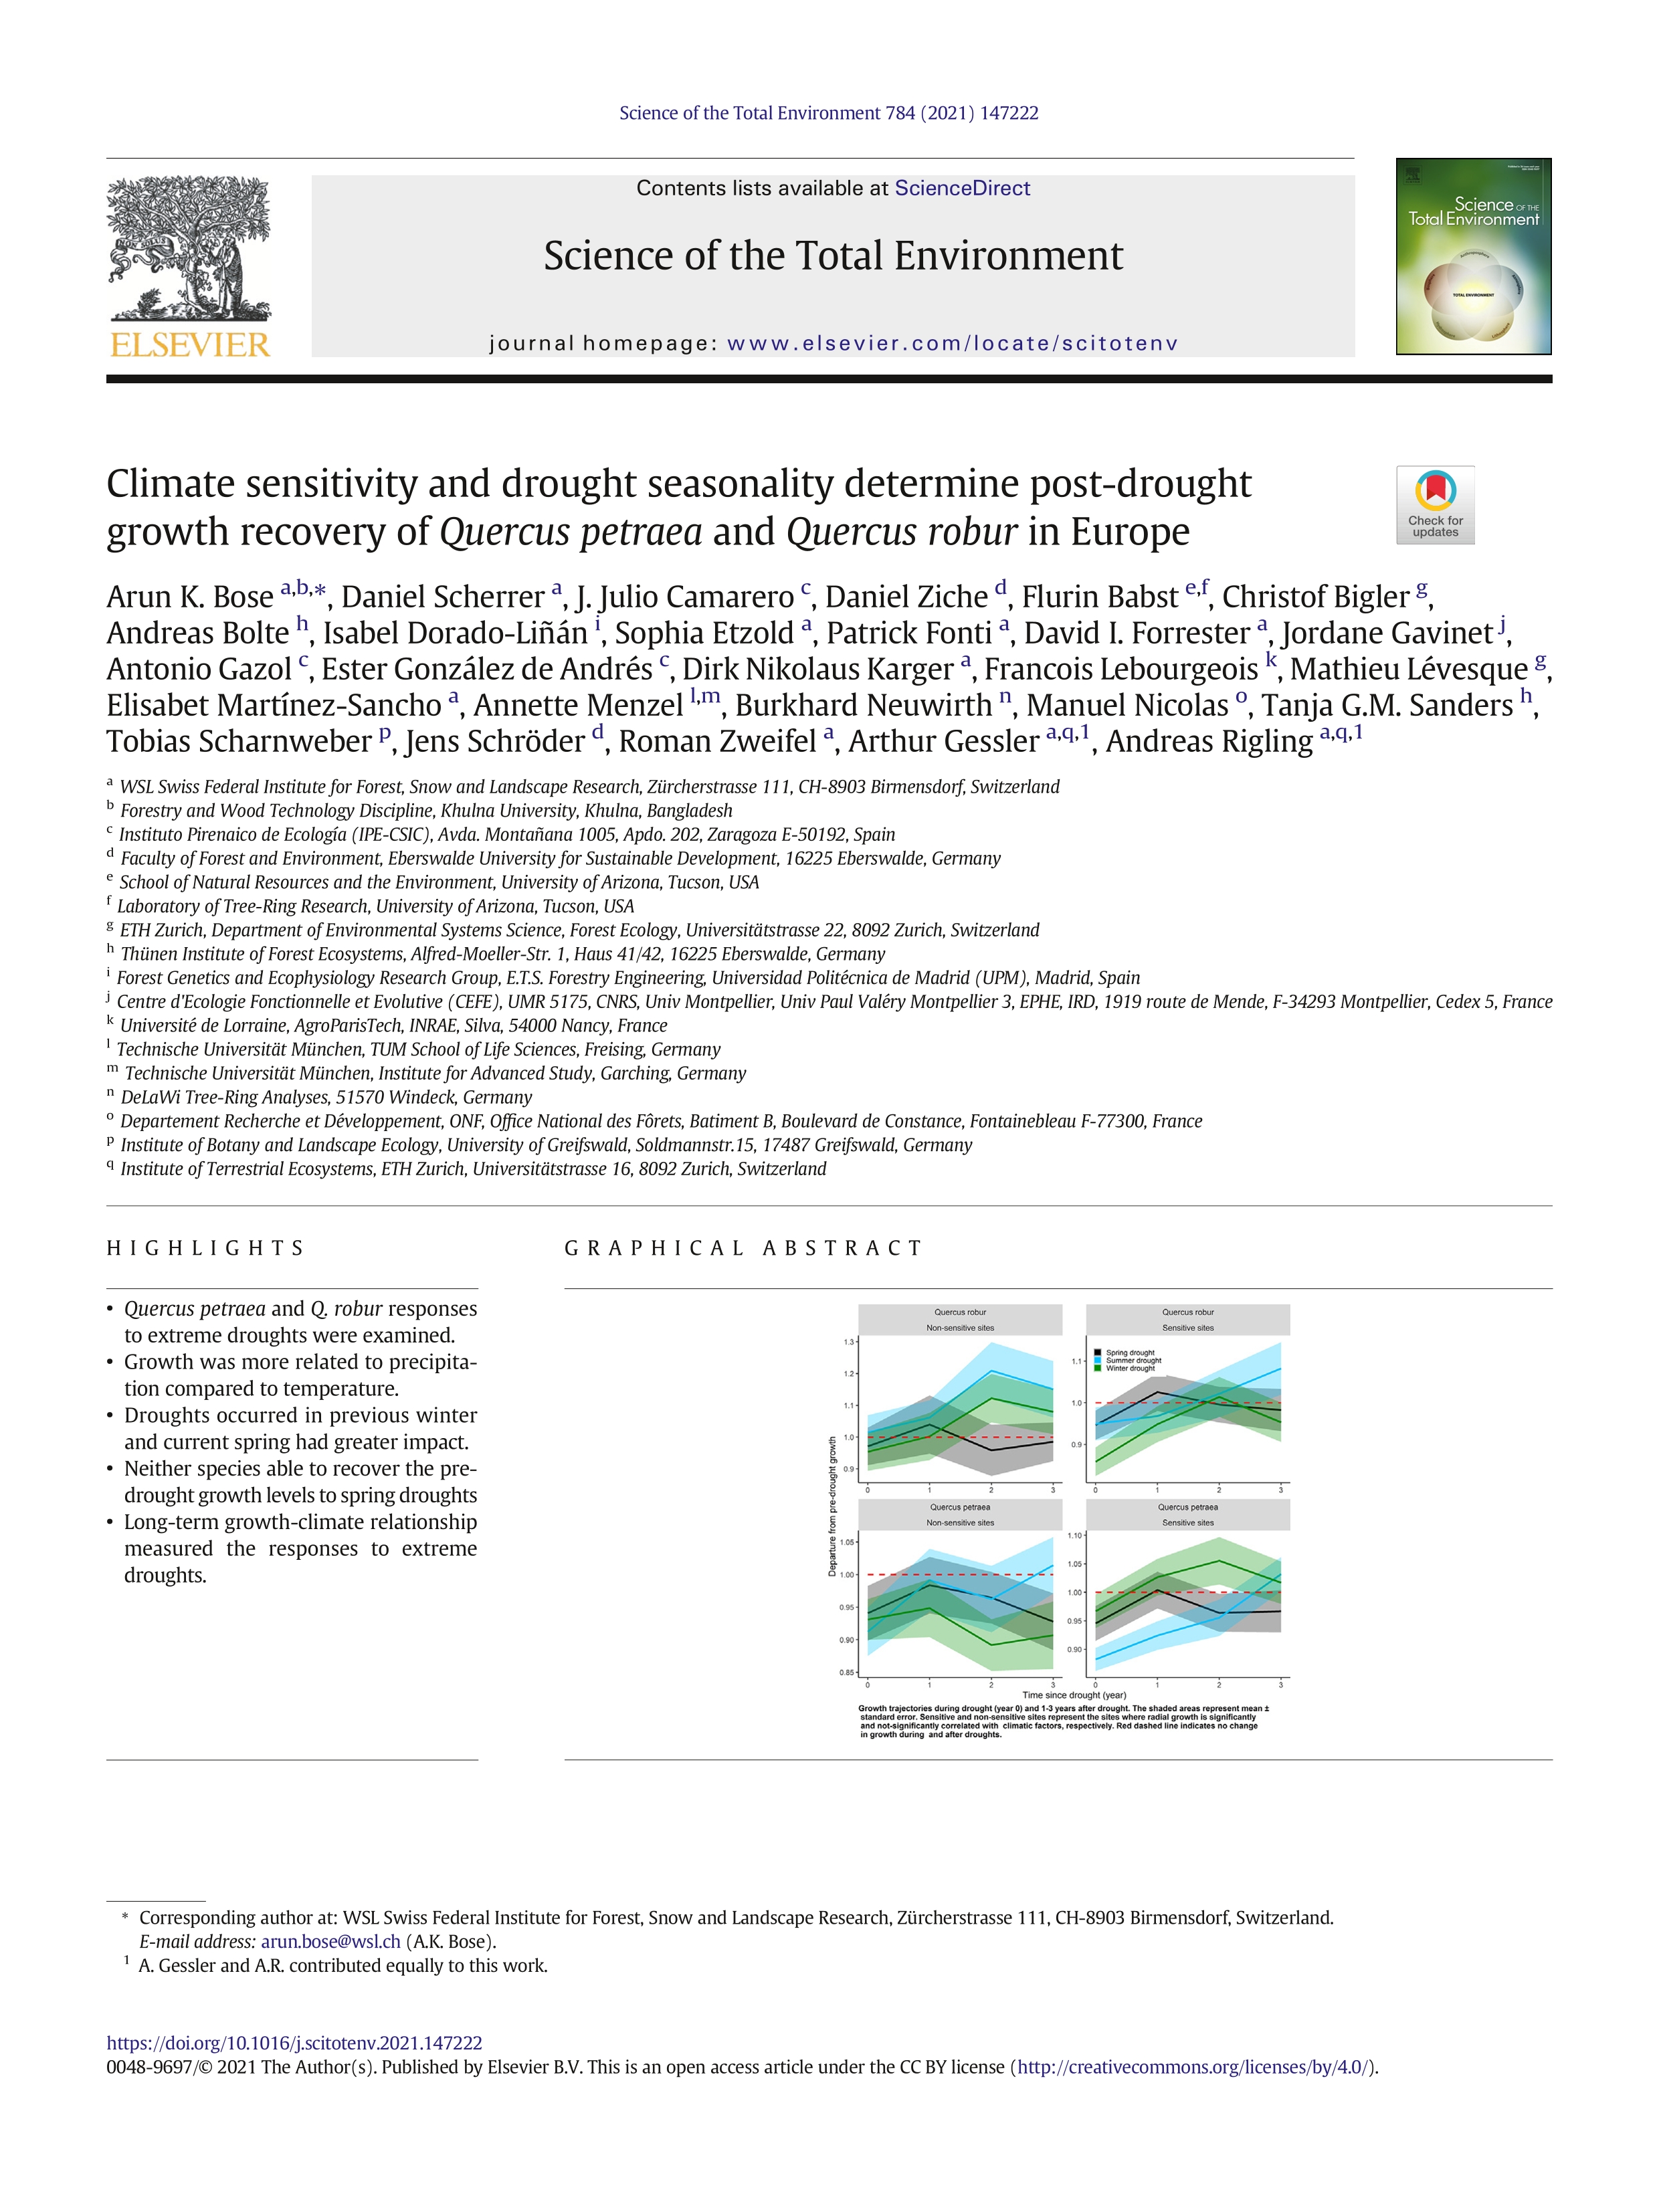 Climate sensitivity and drought seasonality determine post-drought growth recovery of Quercus petraea and Quercus robur in Europe